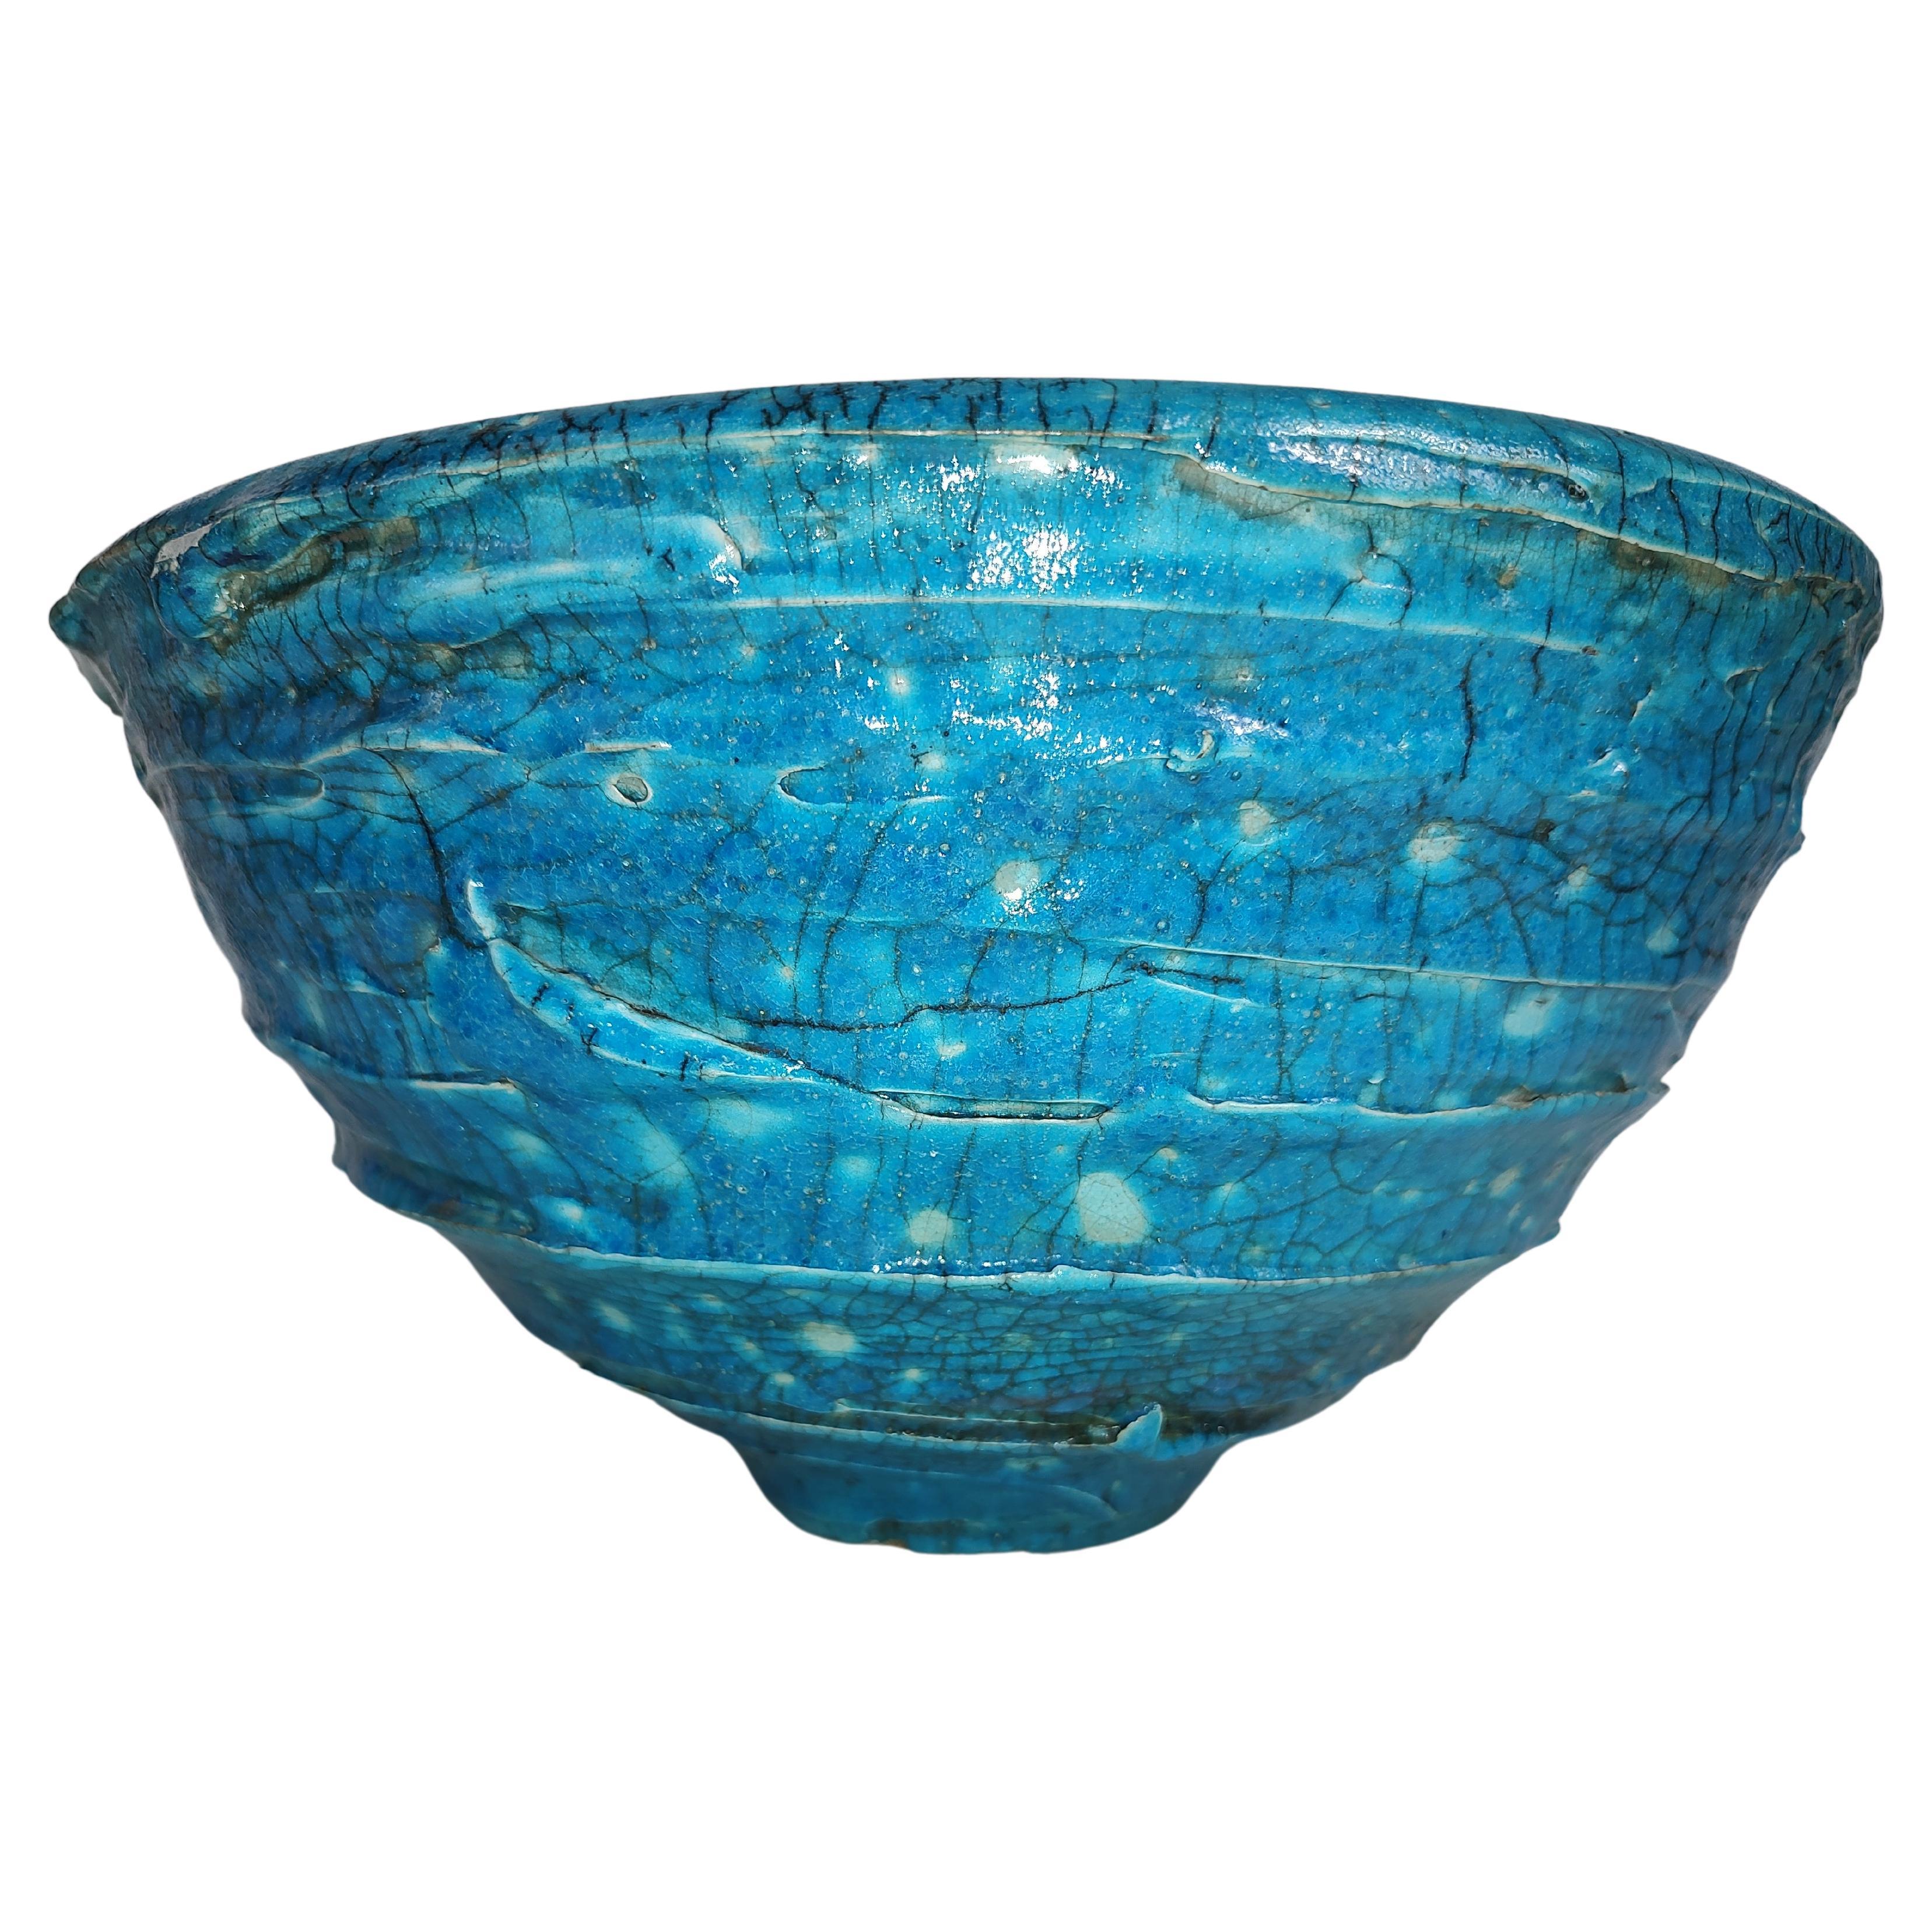 Mid-Century Modern Sculptural Large Art Pottery Bowl in Blue